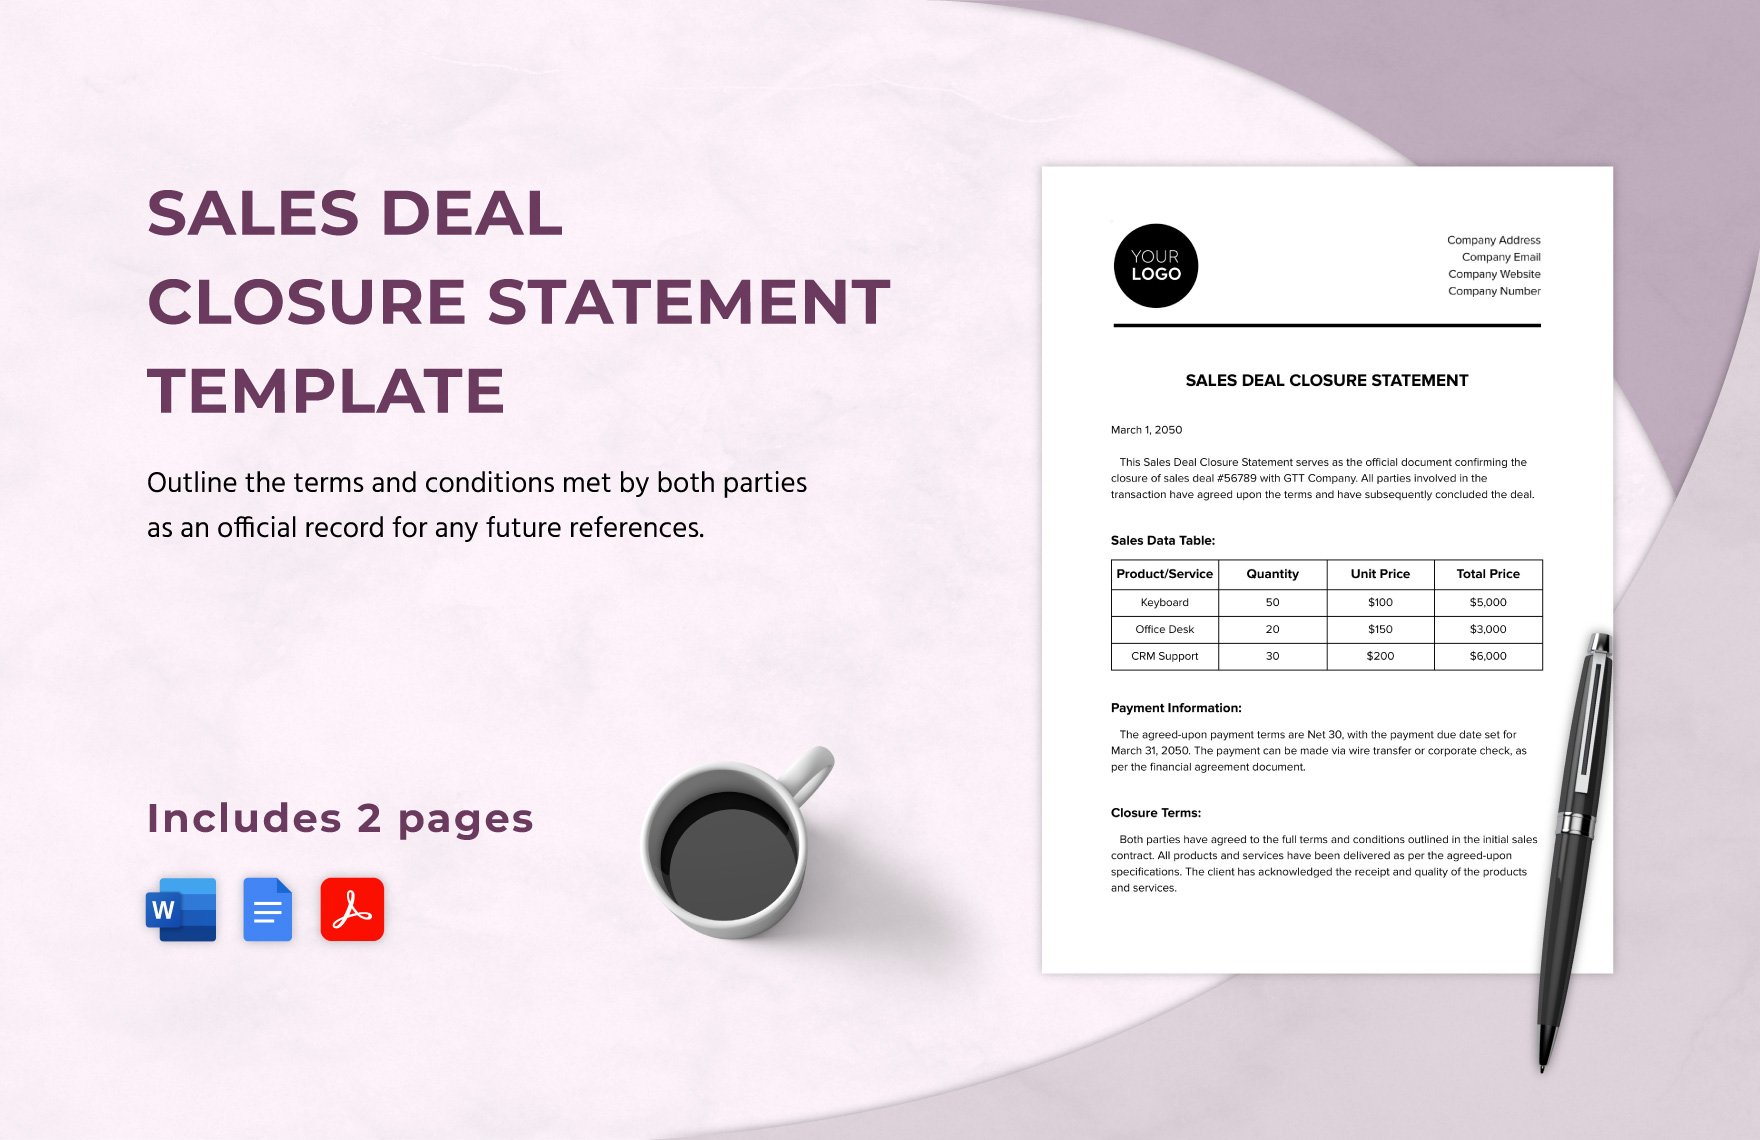 Sales Deal Closure Statement Template in Word, Google Docs, PDF